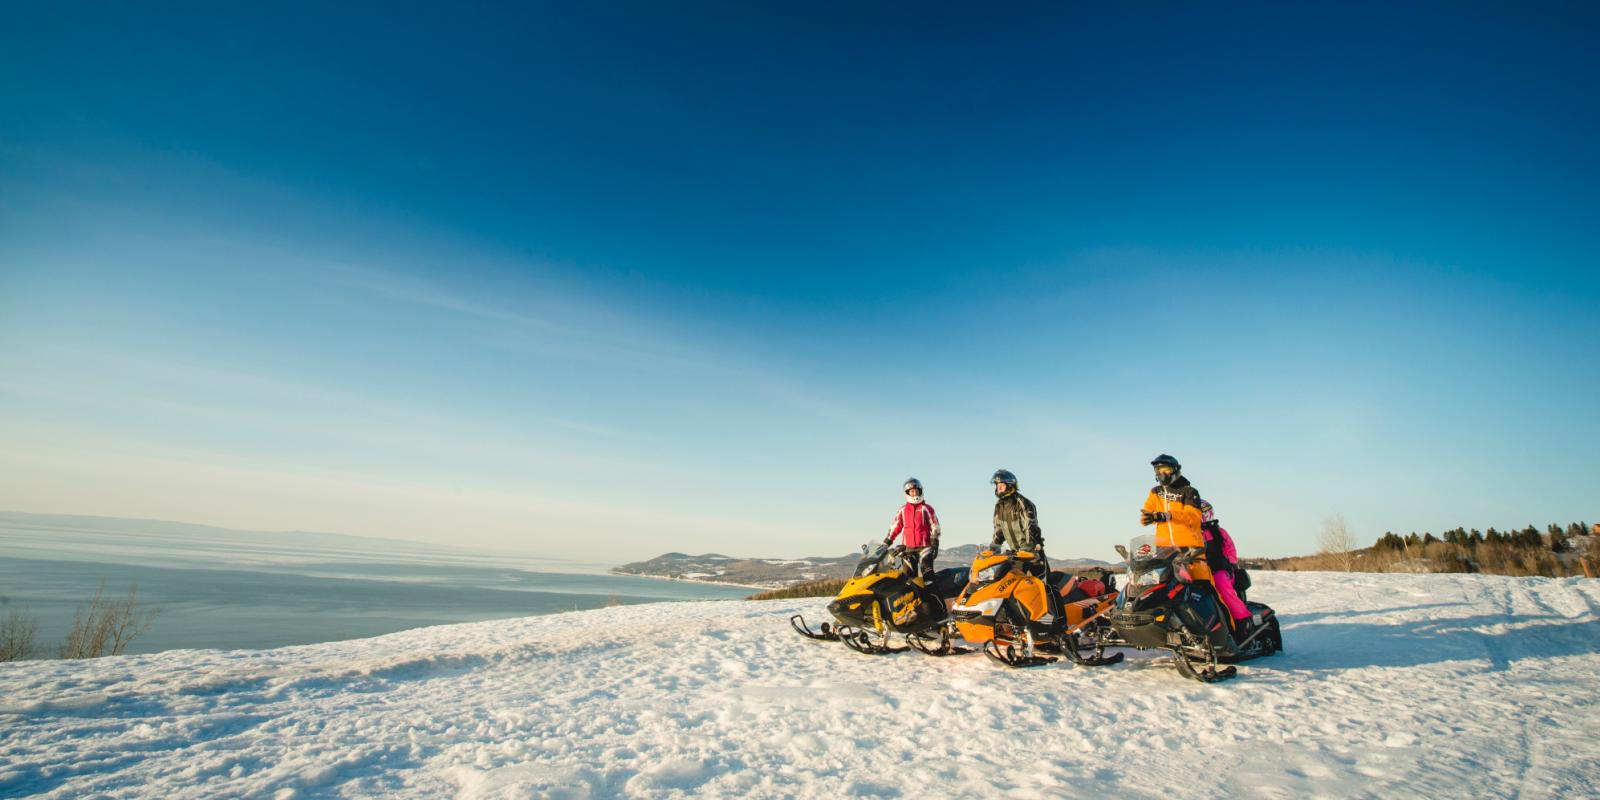 Snowmobilers overlooking the St. Lawrence River in Charlevoix